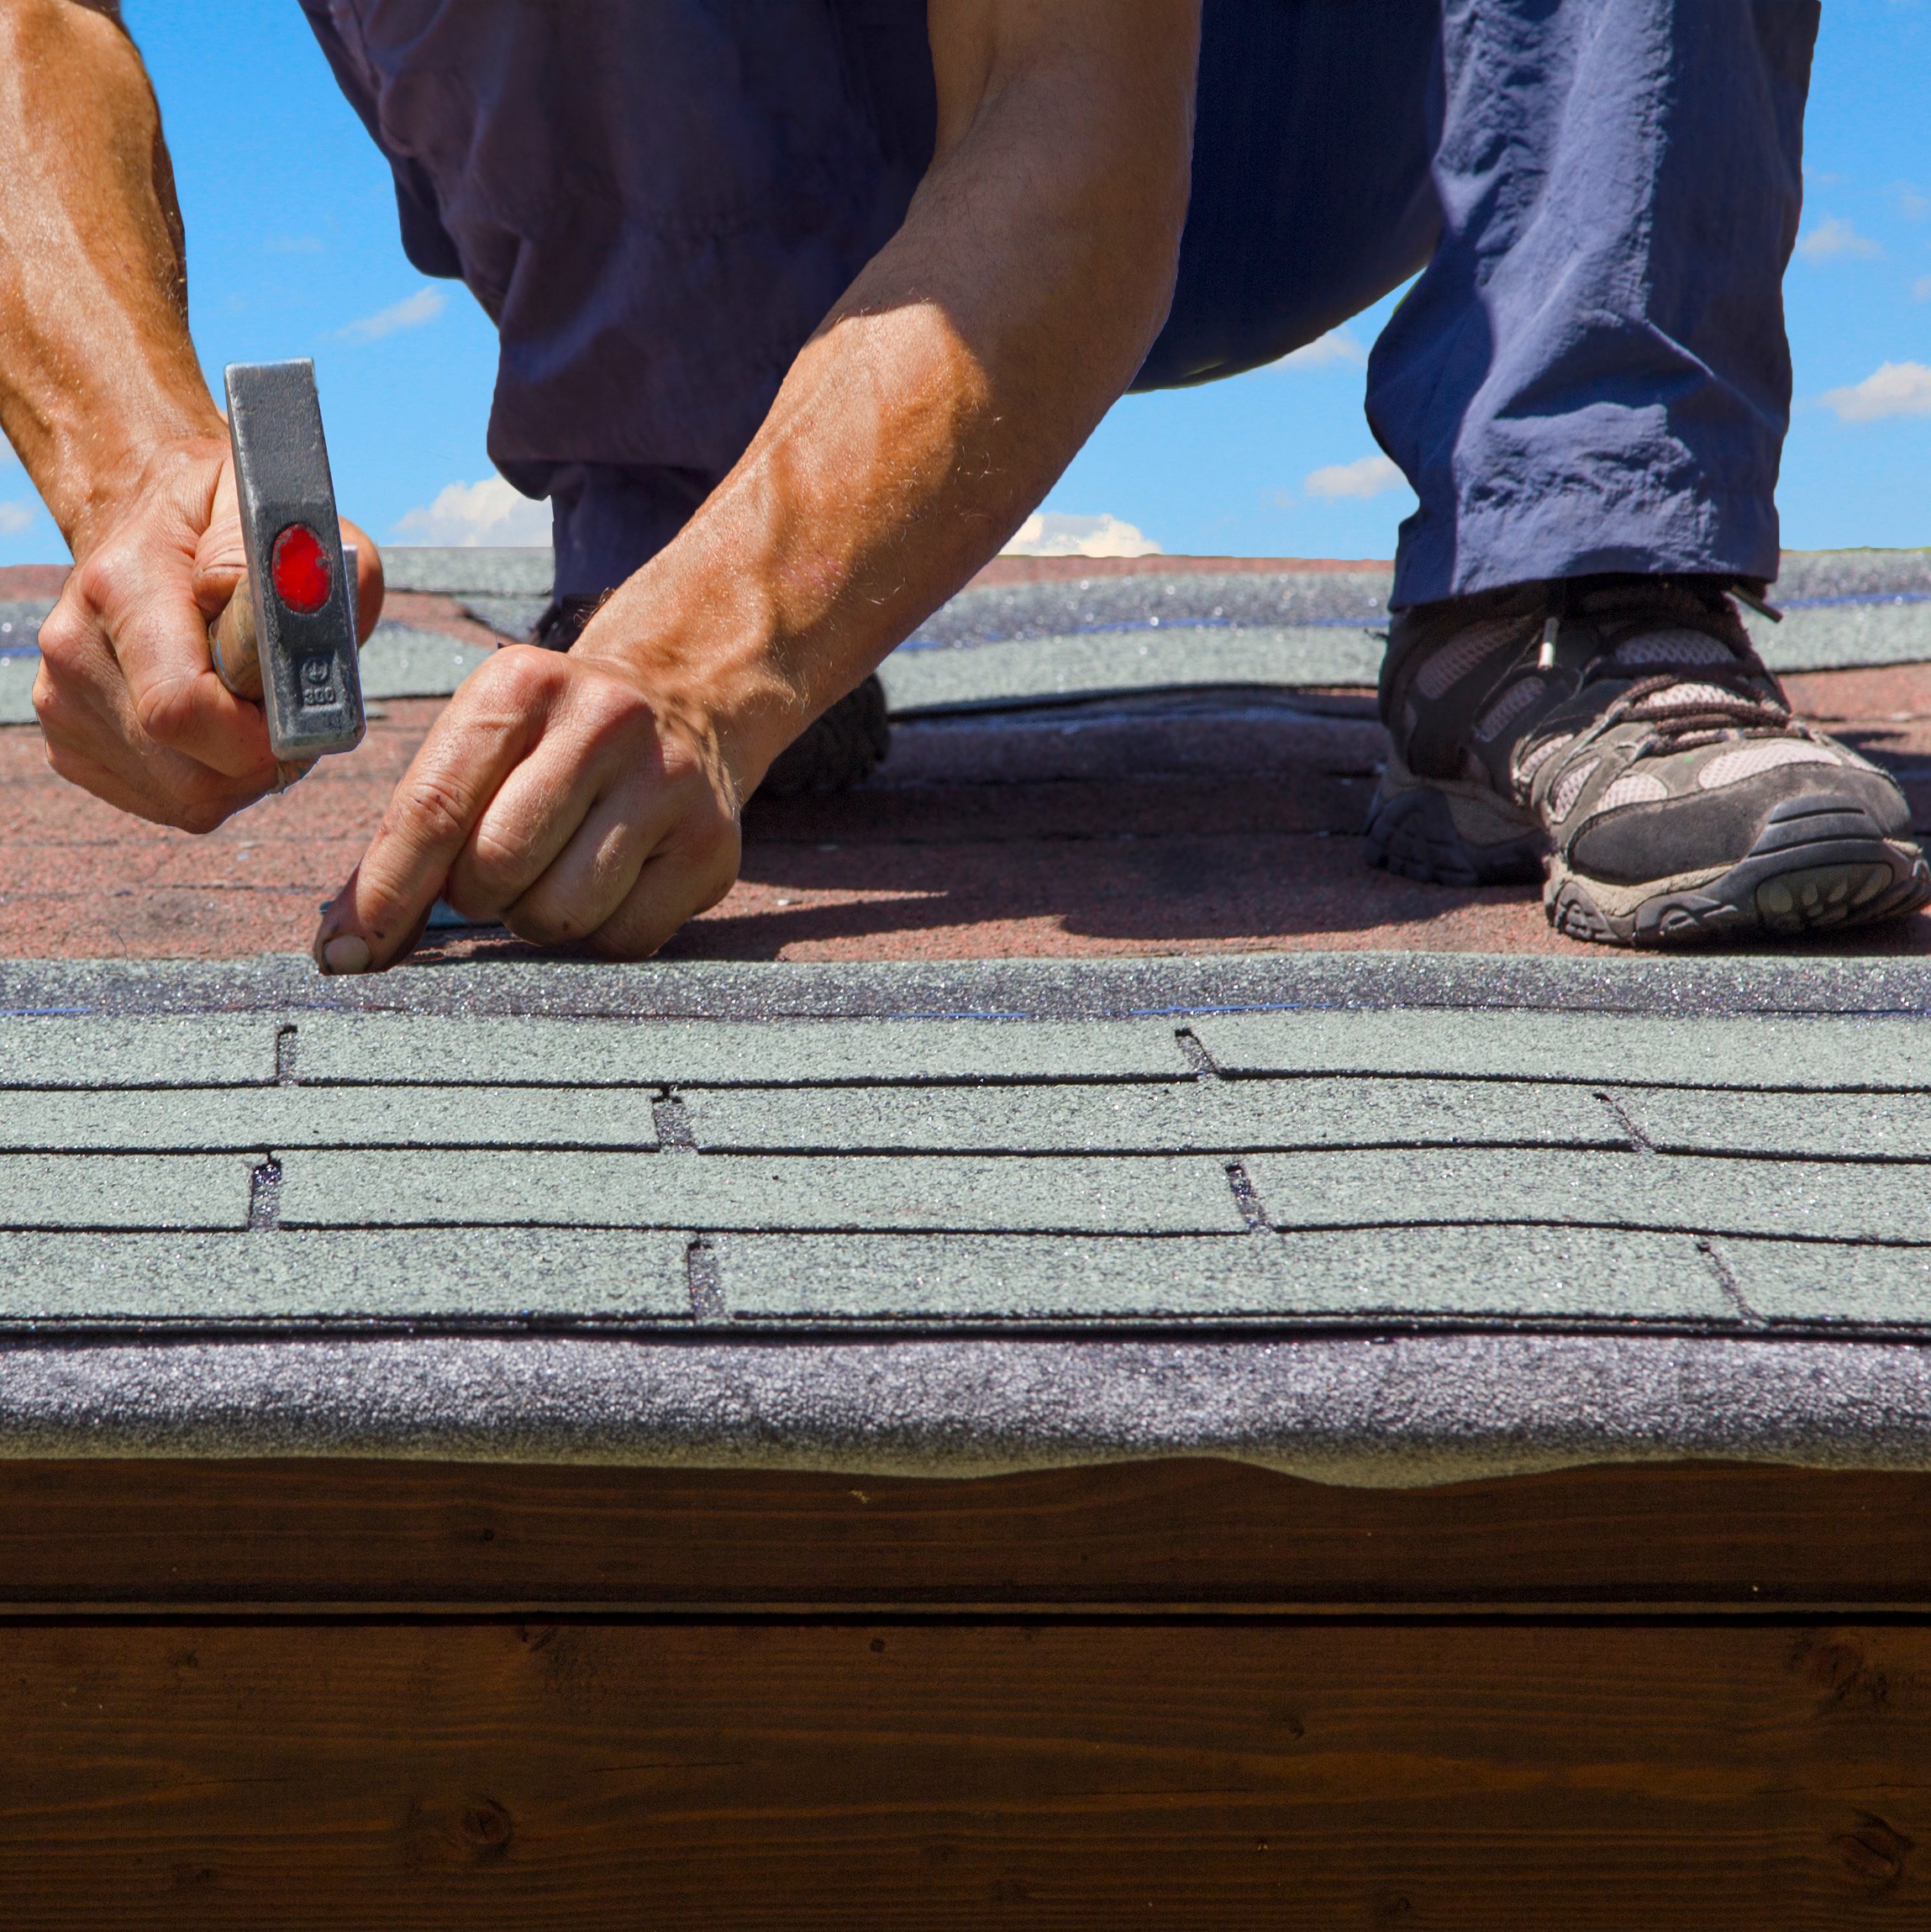 A Roofer Nails in Shingles